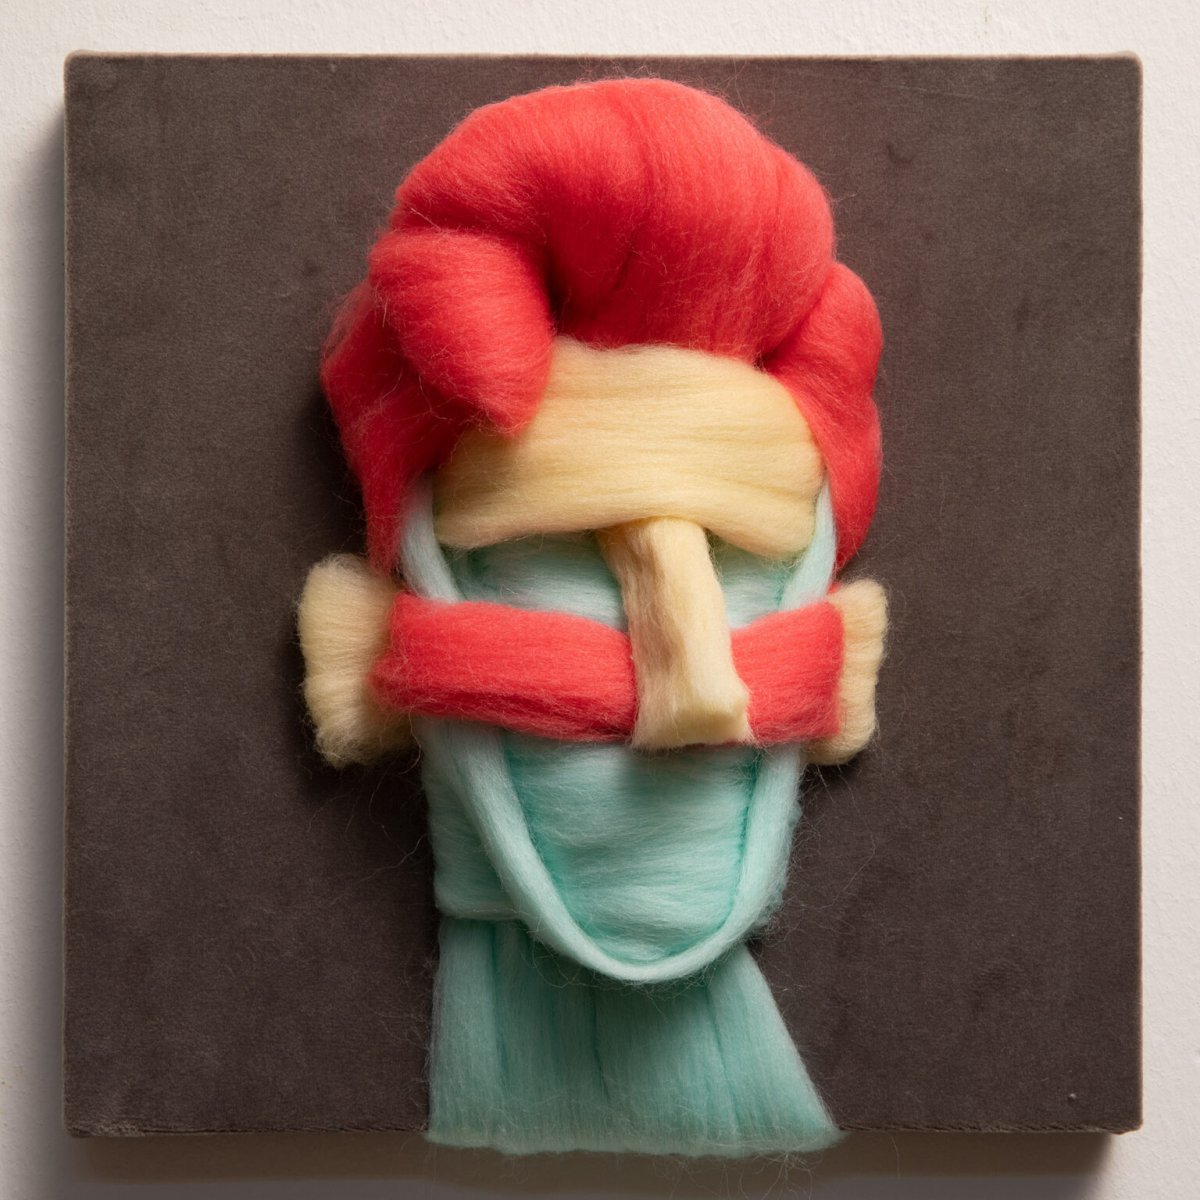 Expressive Sculptural Portraits Made Of Raw Wool By Salman Khoshroo 16